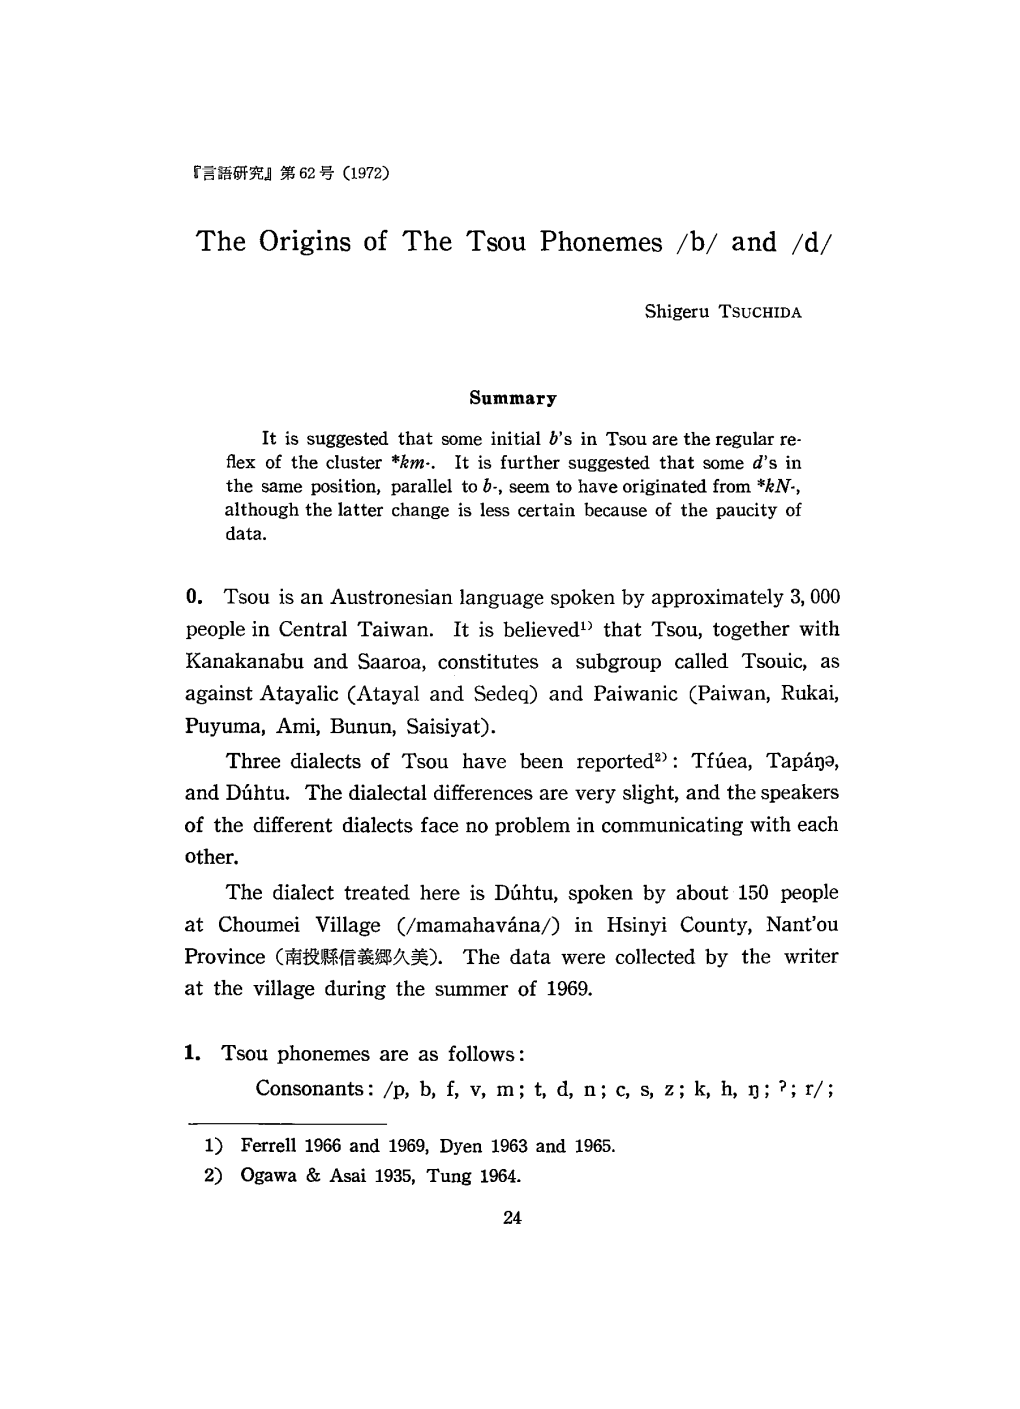 The Origins of the Tsou Phonemes /B/ and /D